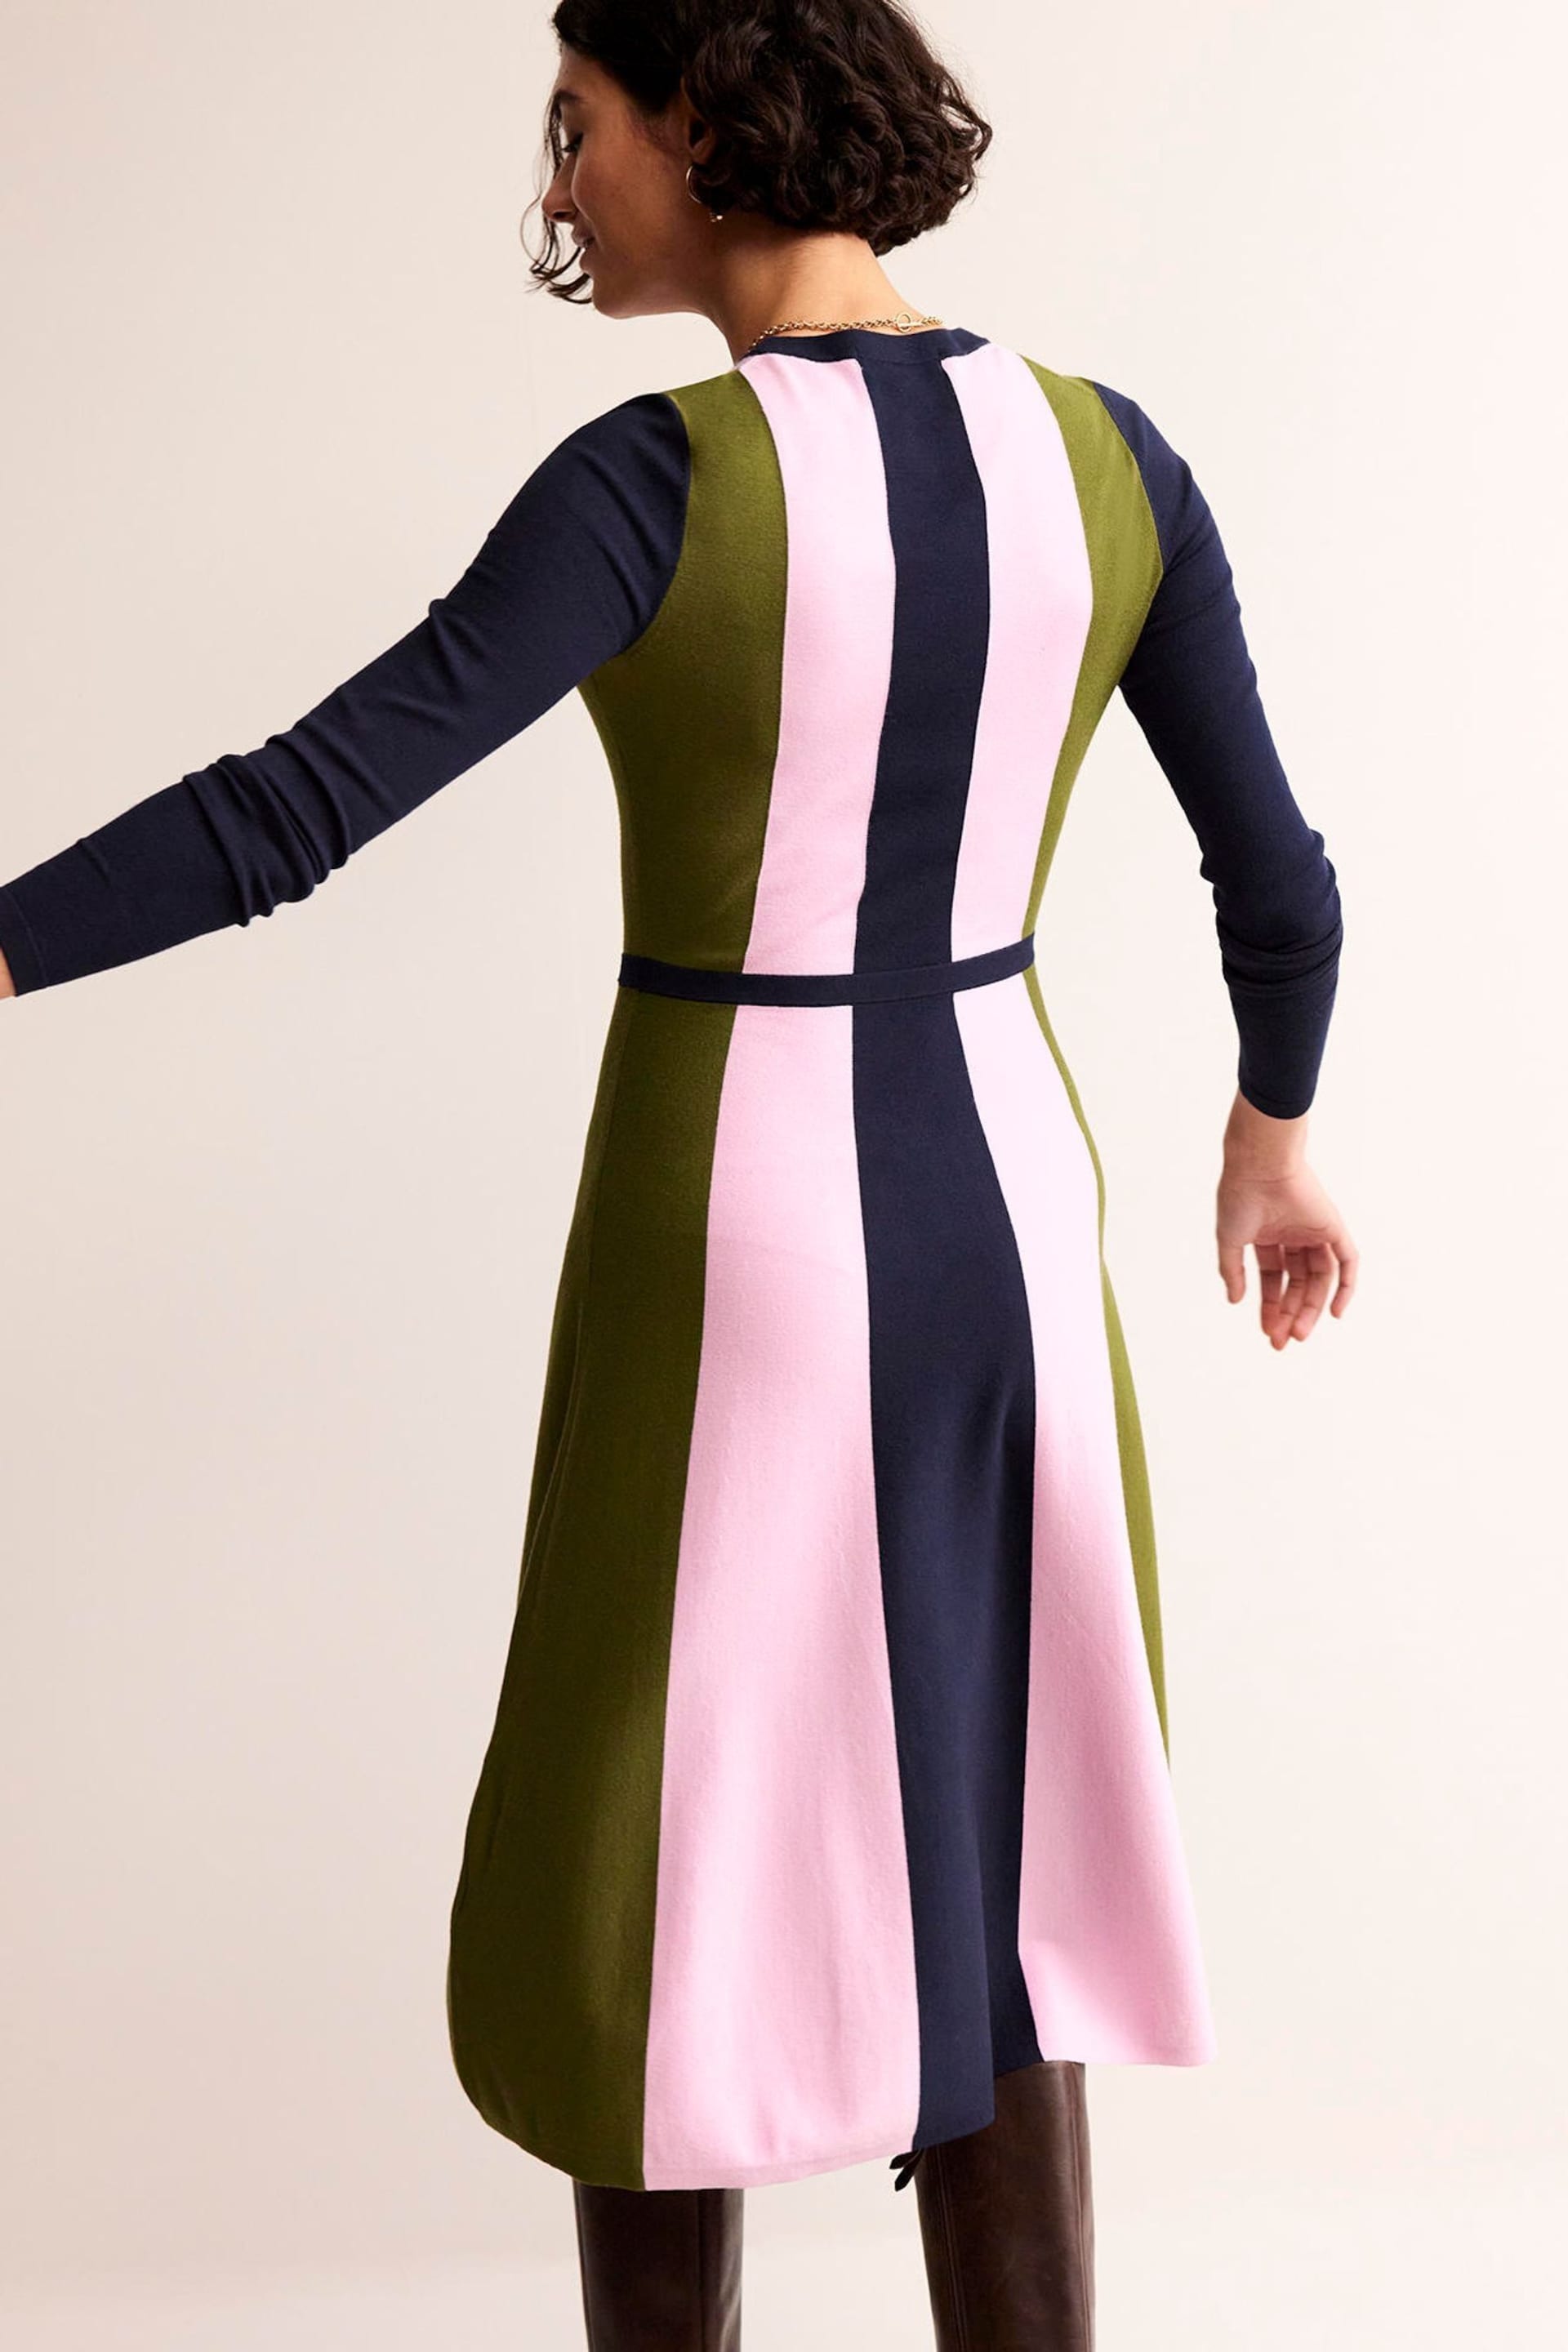 Boden Blue/Pink/Green Colour Block Knitted Dress - Image 2 of 6